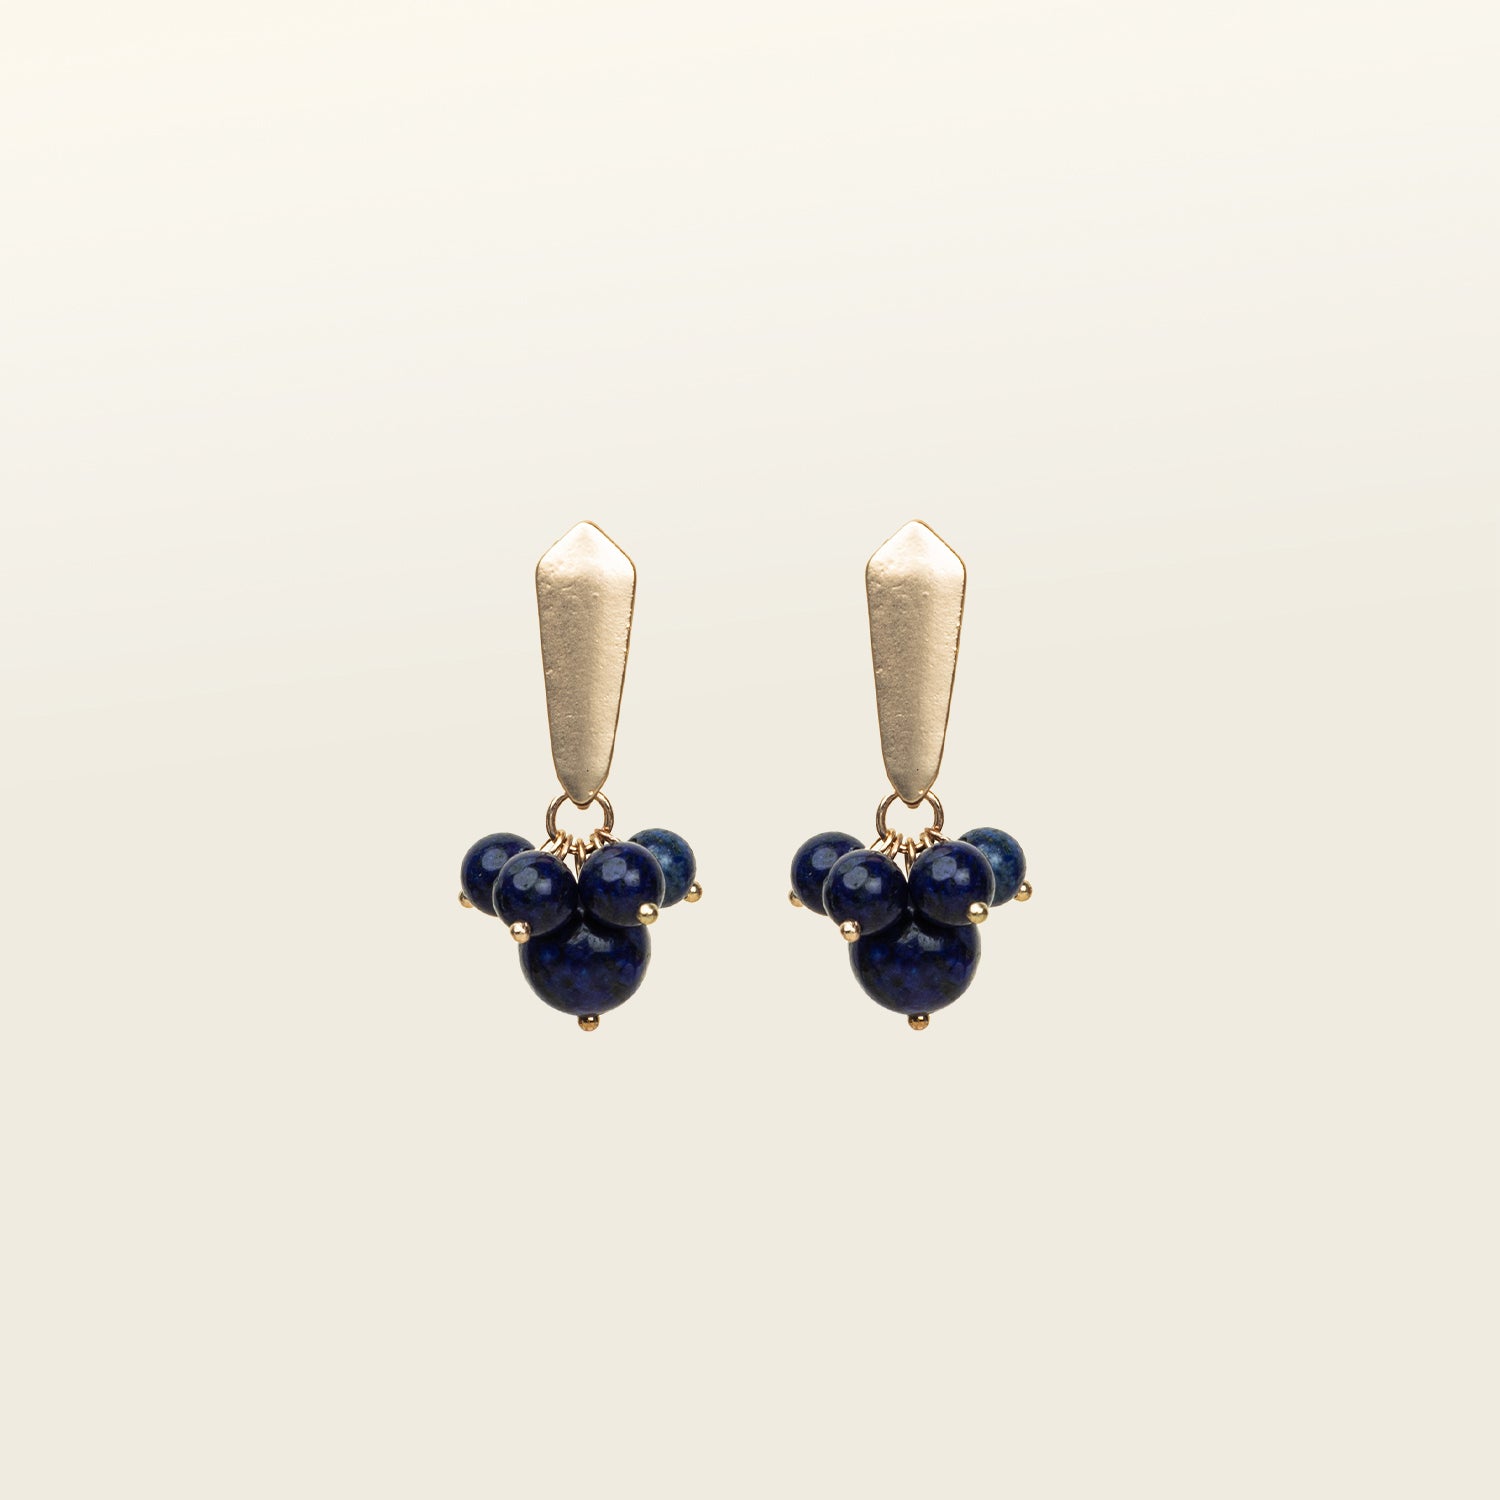 Stylish clip-on pearl earrings in dark blue, perfect for all ear types. Enjoy a secure hold with the padded closure. Crafted from matte gold tone copper alloy with agate and glass bead detailing.